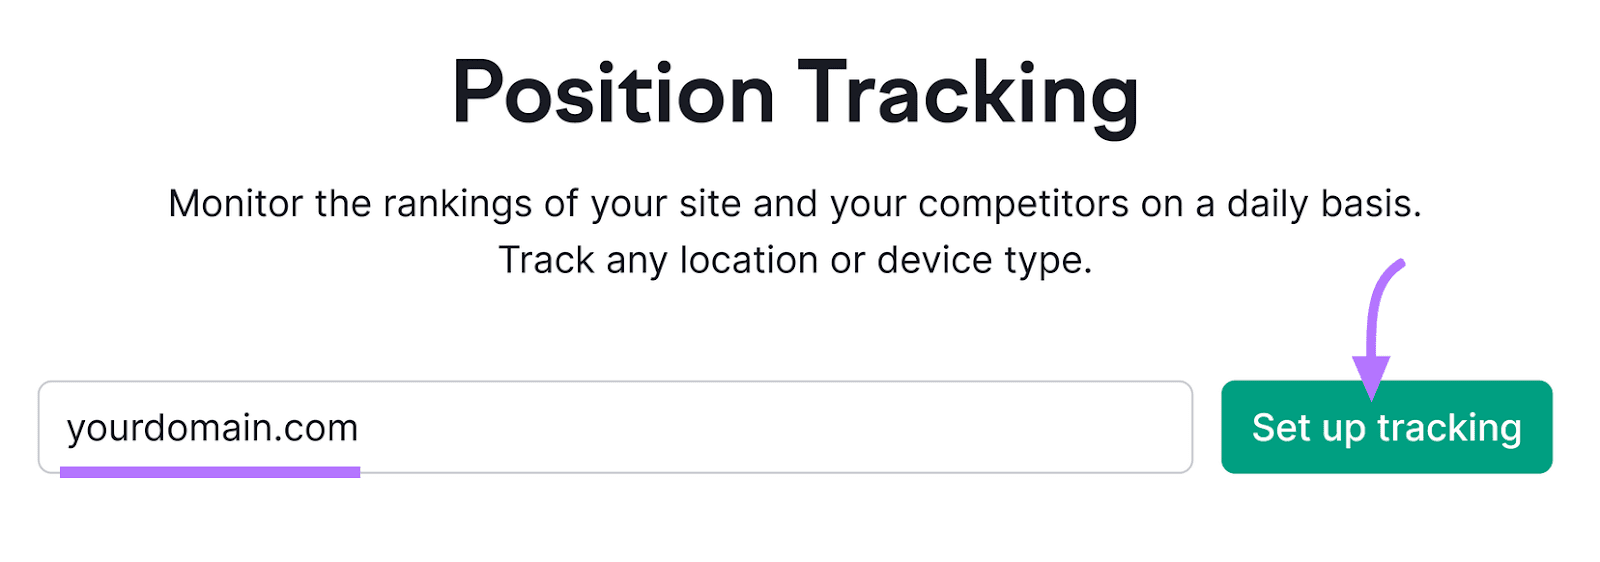 Set up tracking in Position Tracking tool